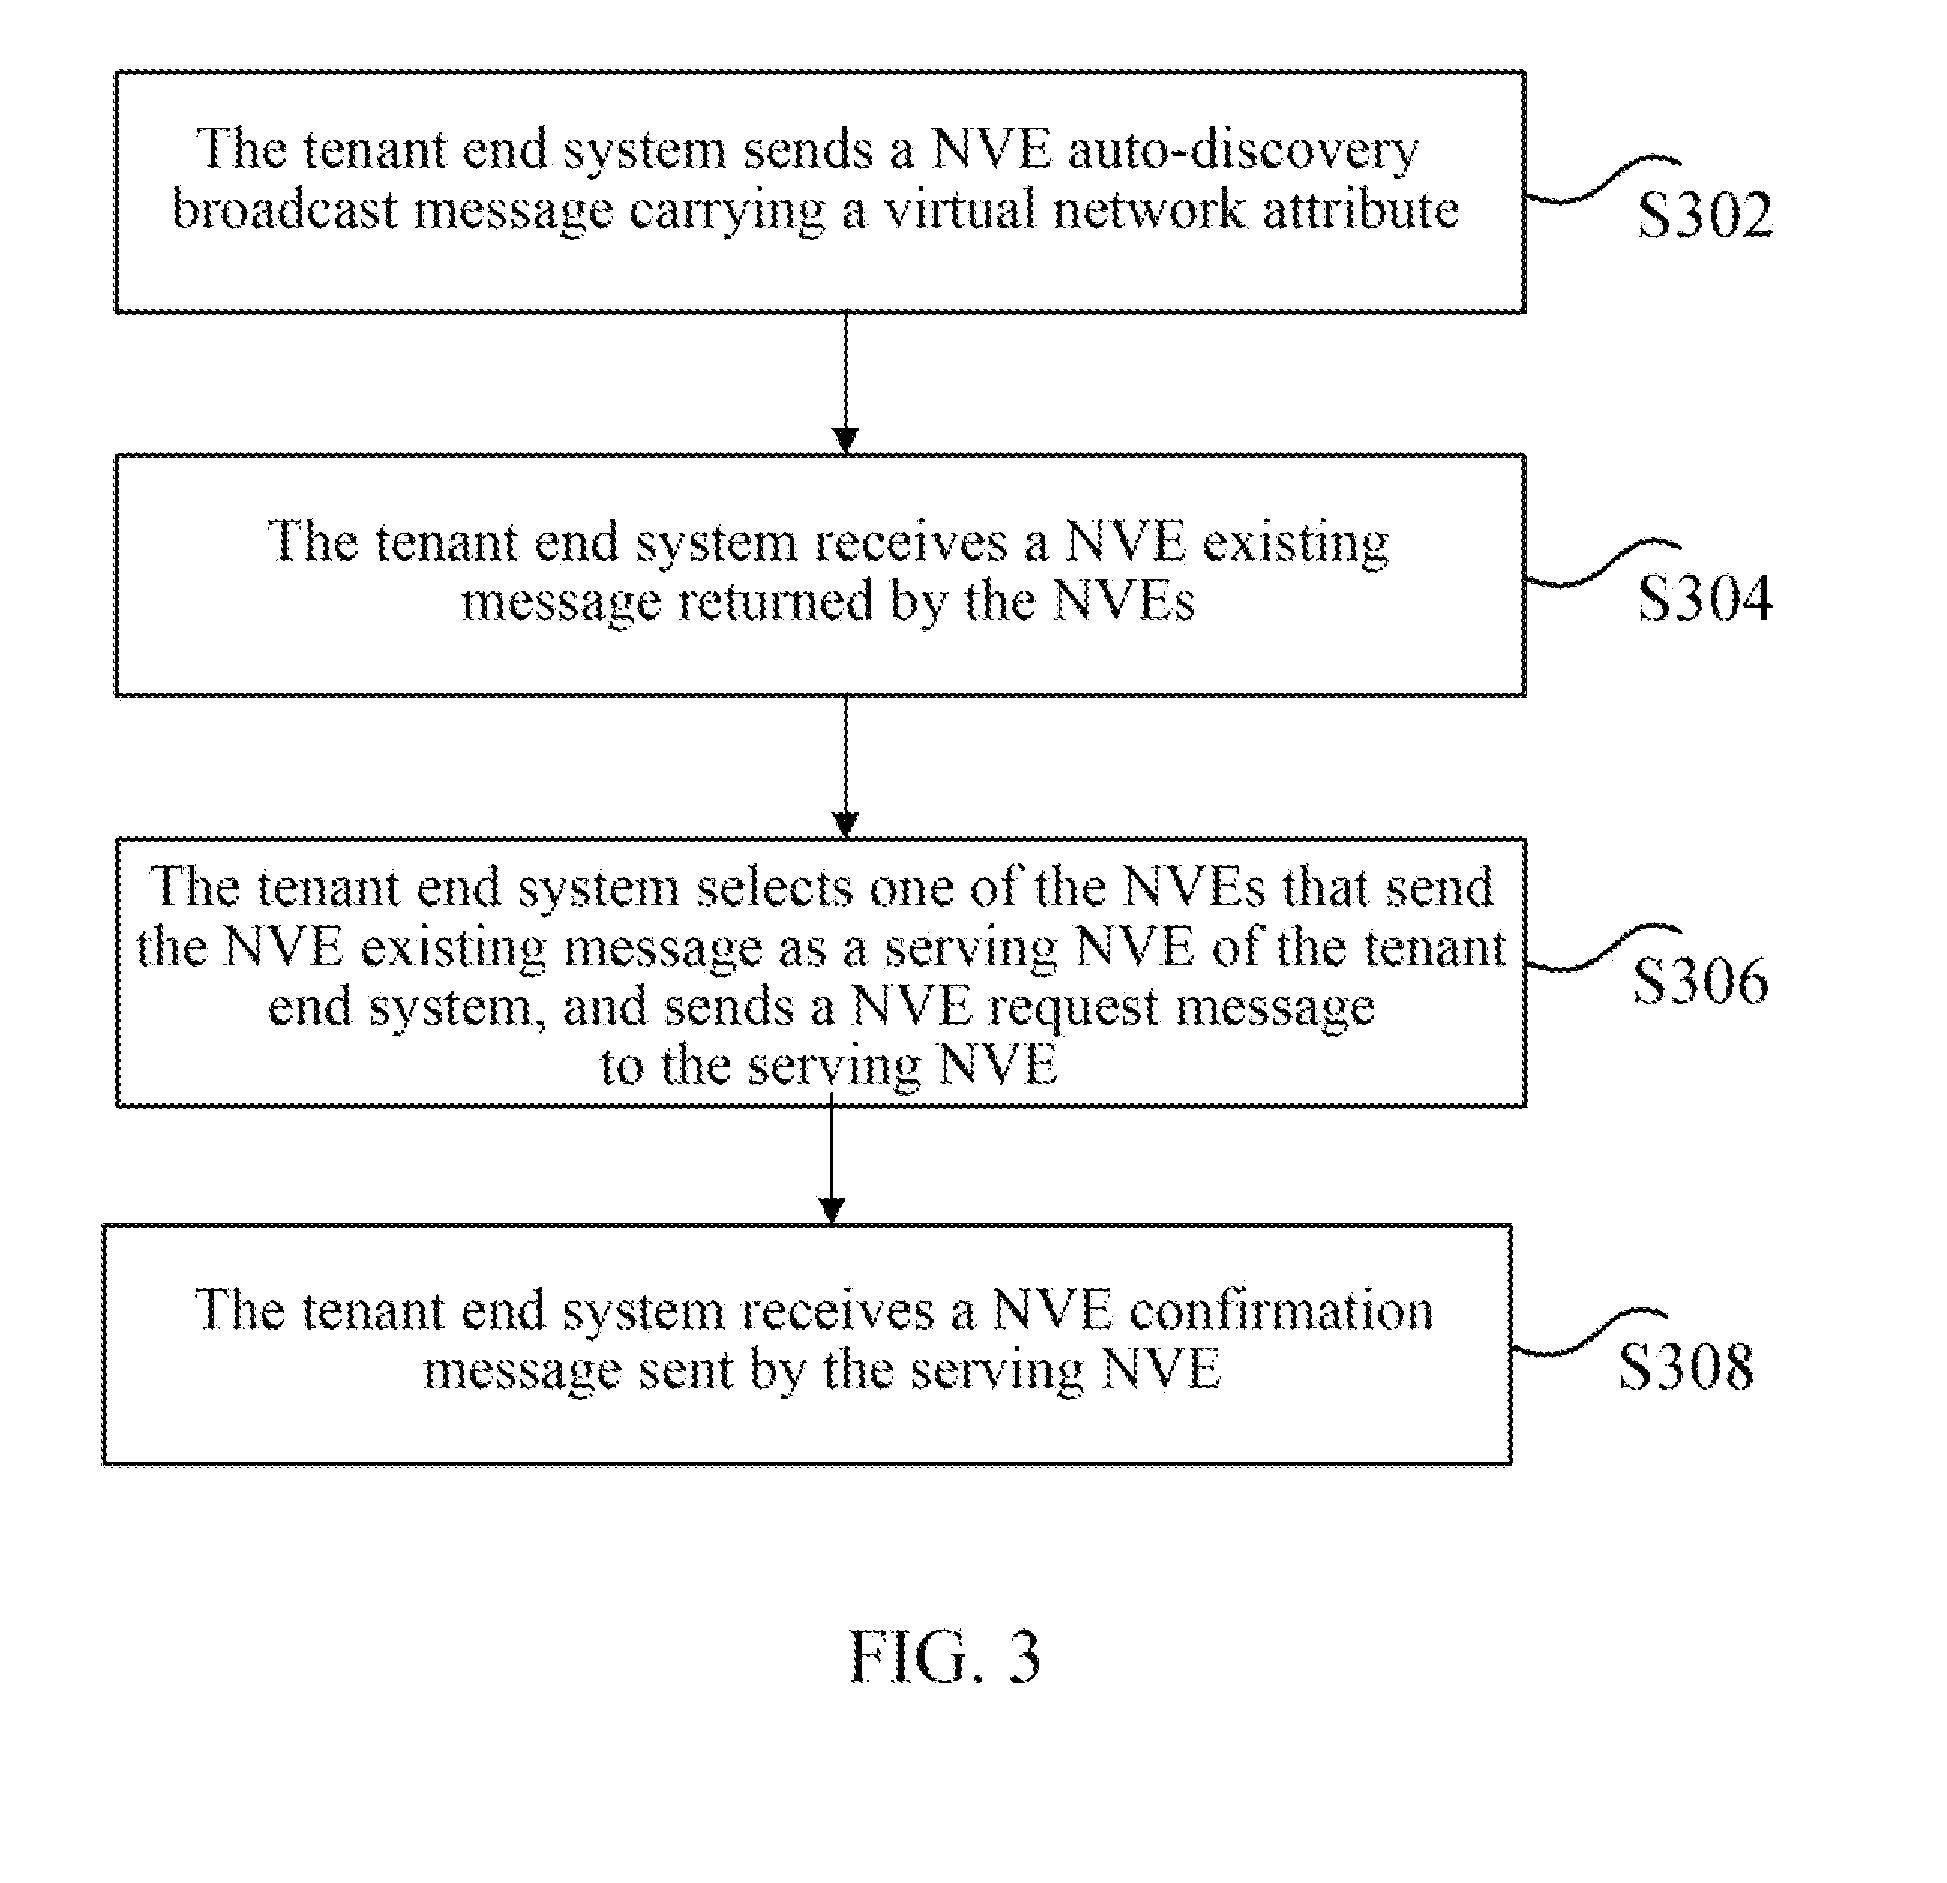 Method and device thereof for automatically finding and configuring virtual network